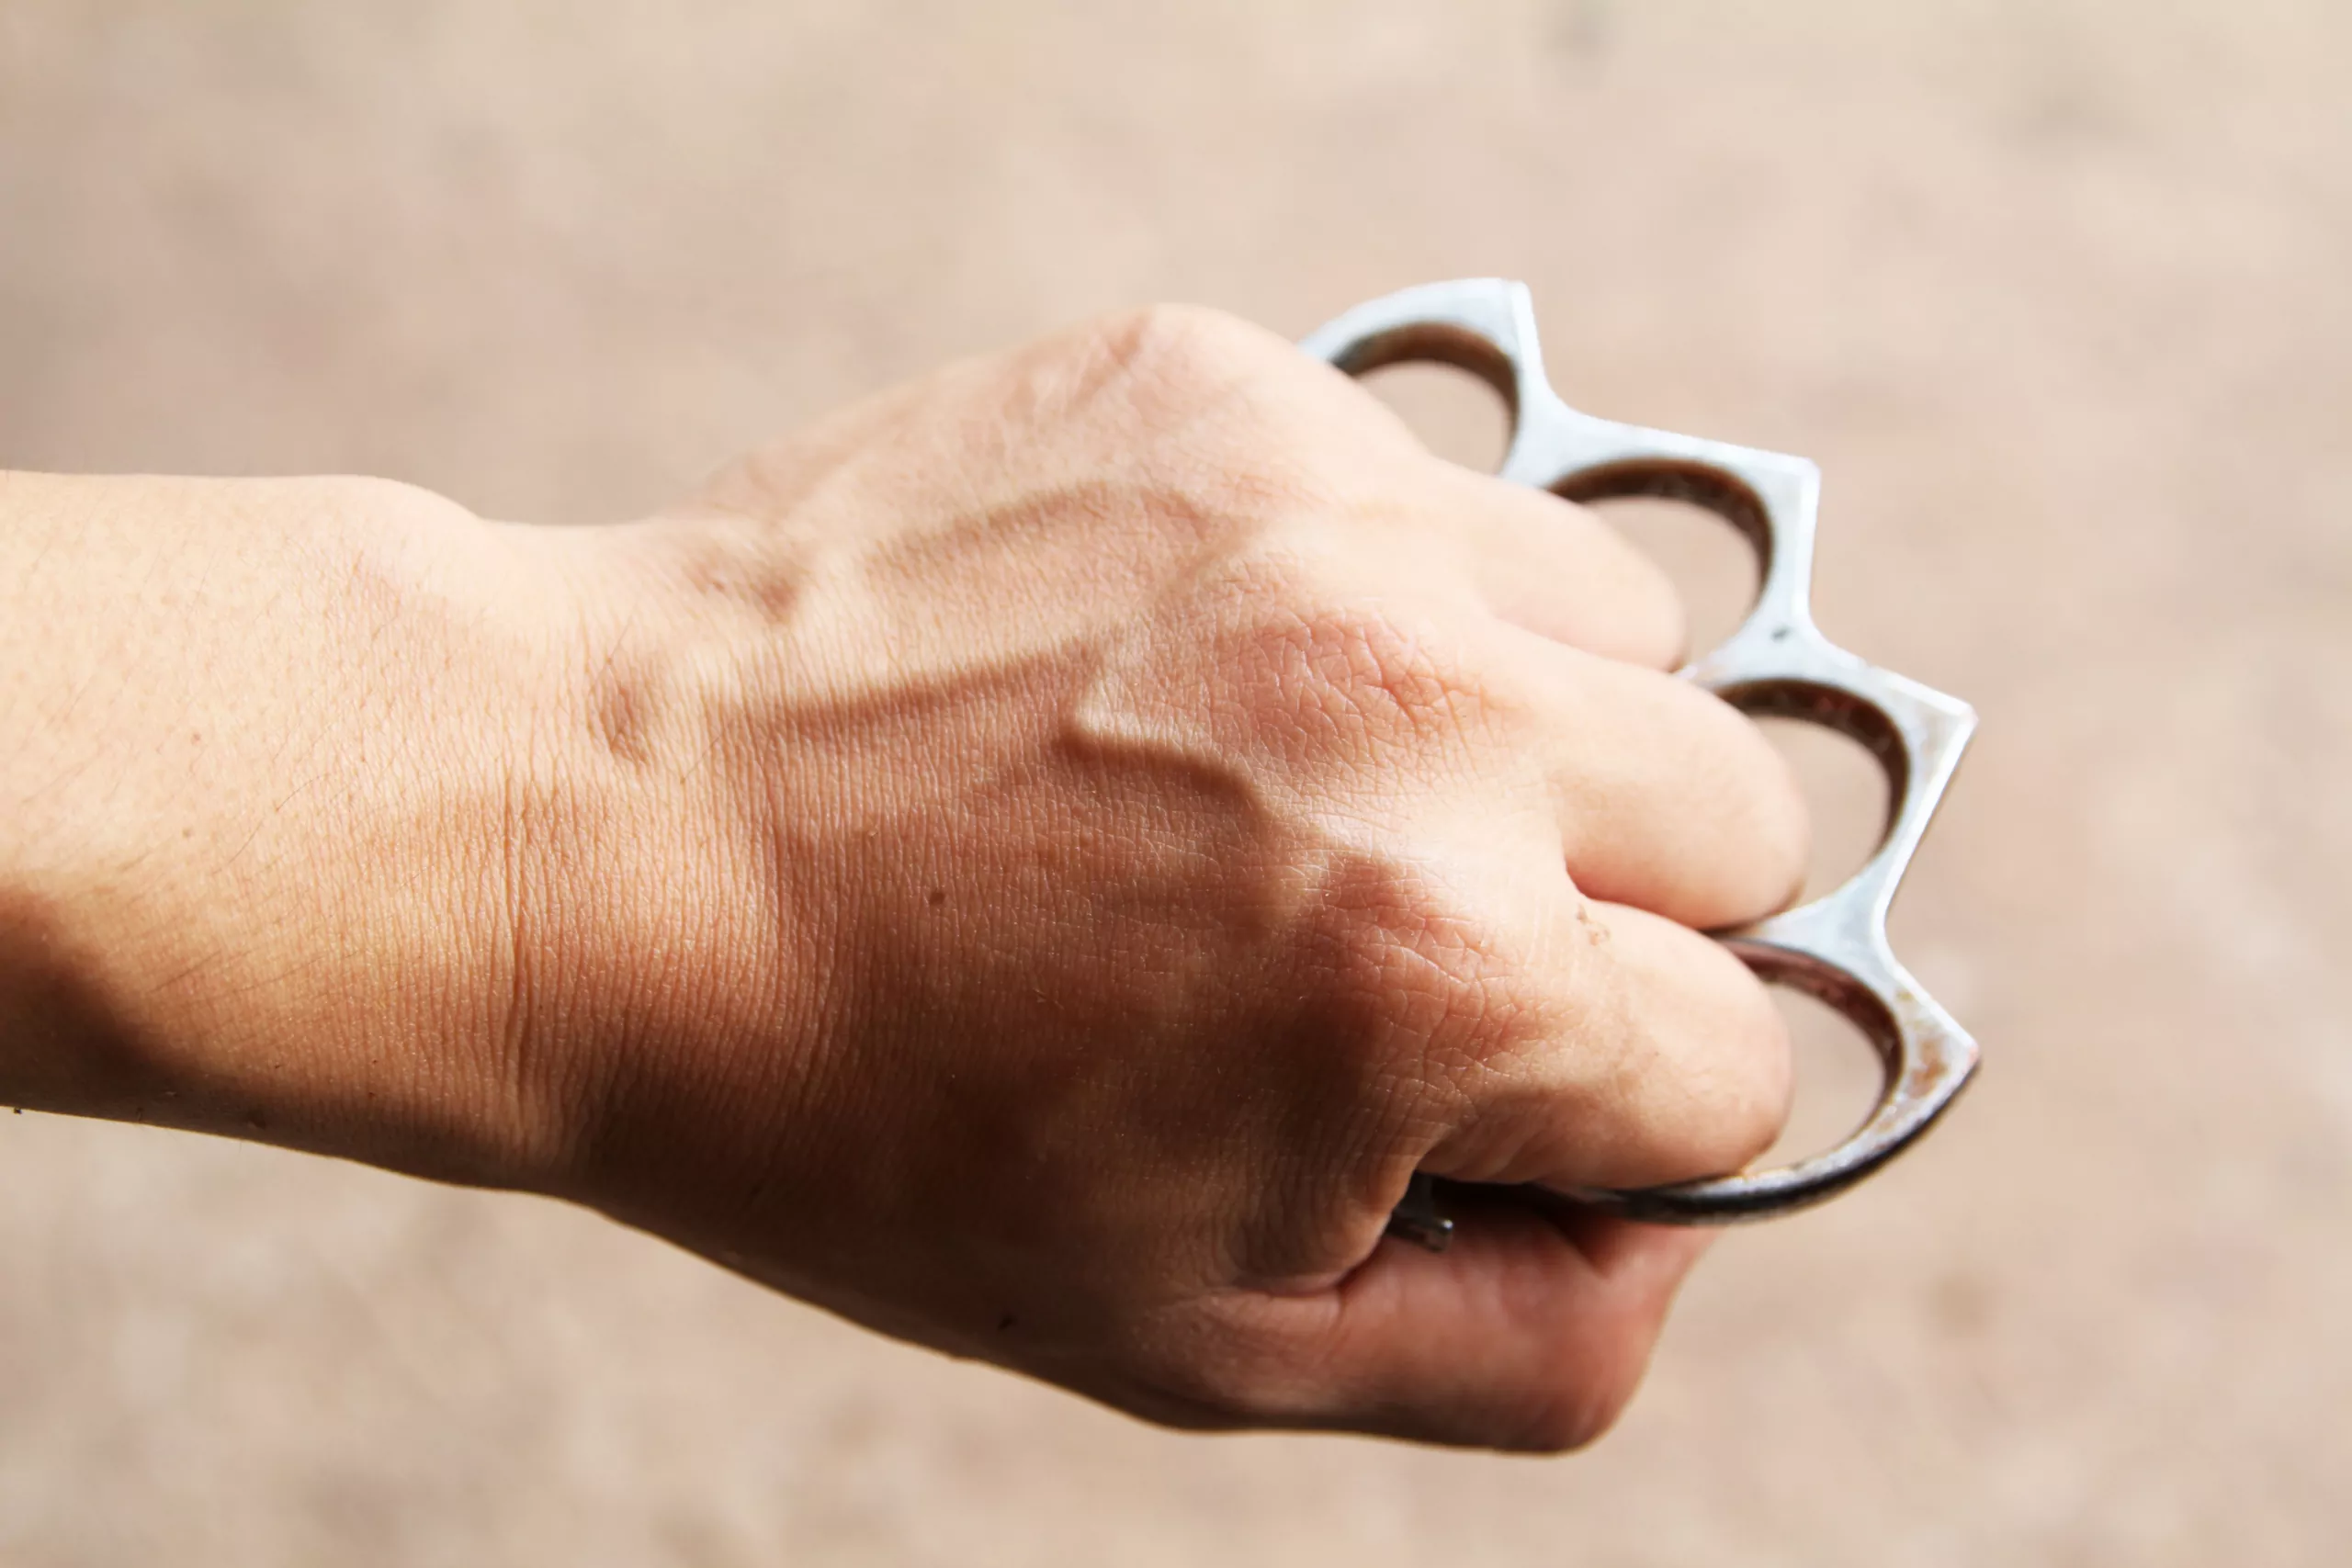 Brass Knuckles vs. Knuckle Dusters: What's the Difference